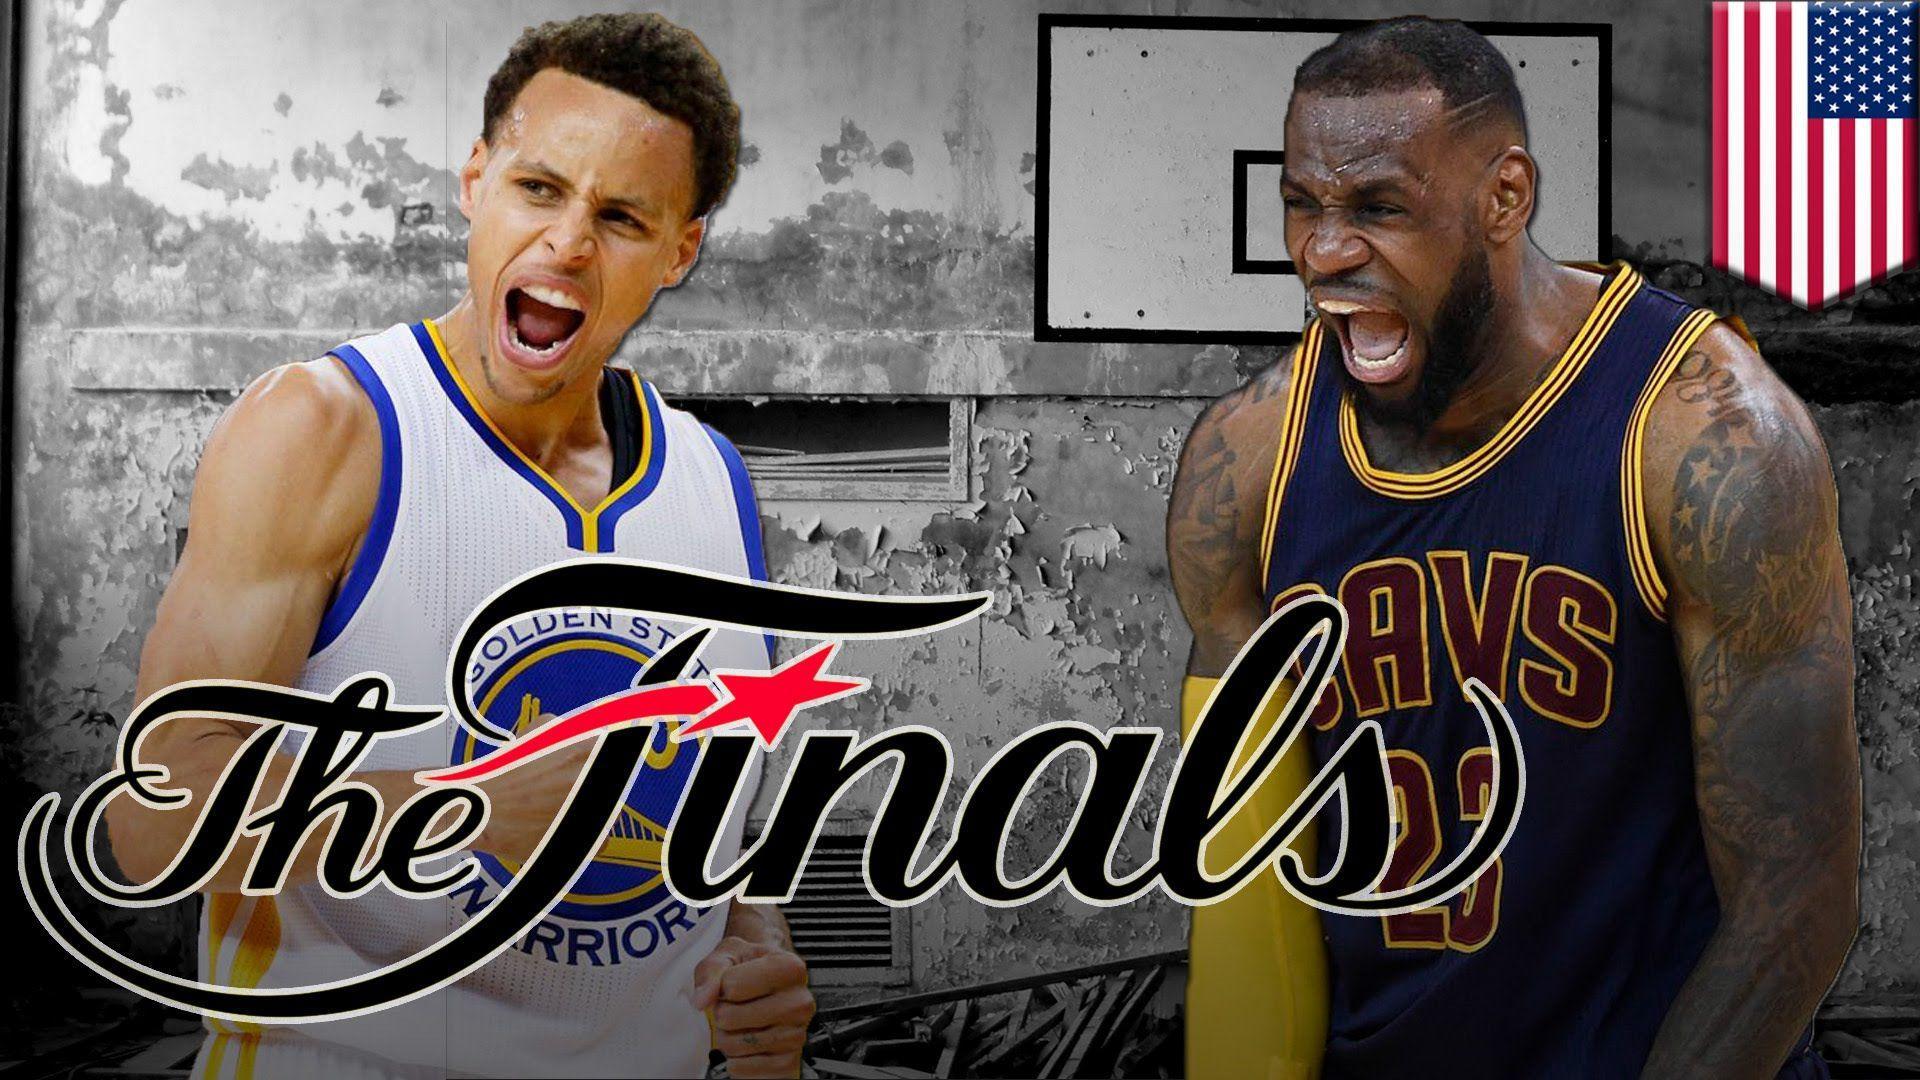 Warriors win 2015 NBA Finals: Curry has strength in numbers